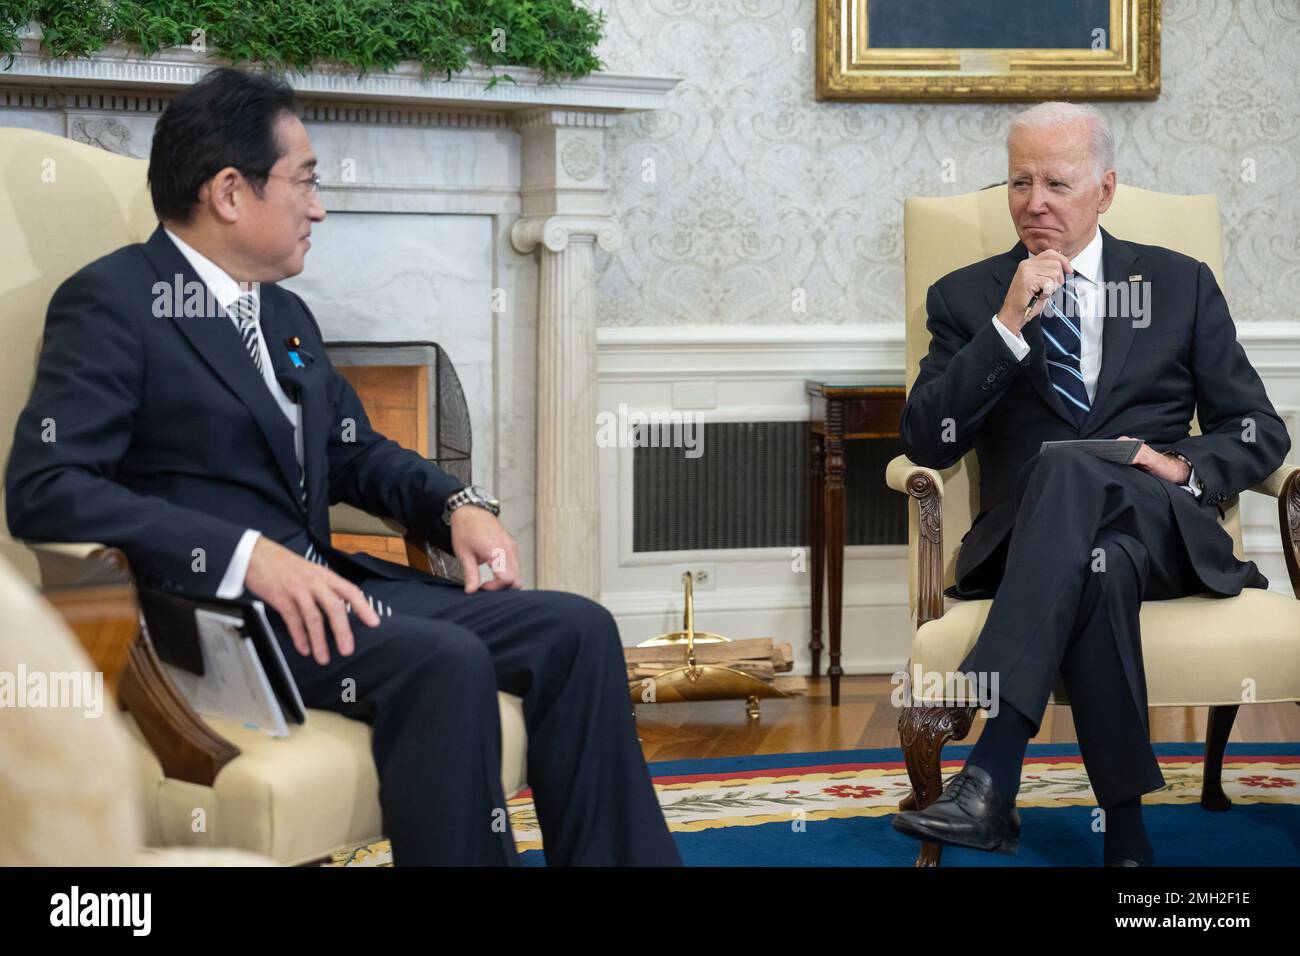 President Joe Biden meets with Japanese Prime Minister Fumio Kishida, Friday, January 13, 2023, in the Oval Office. (Official White House Photo by Adam Schultz) Stock Photo